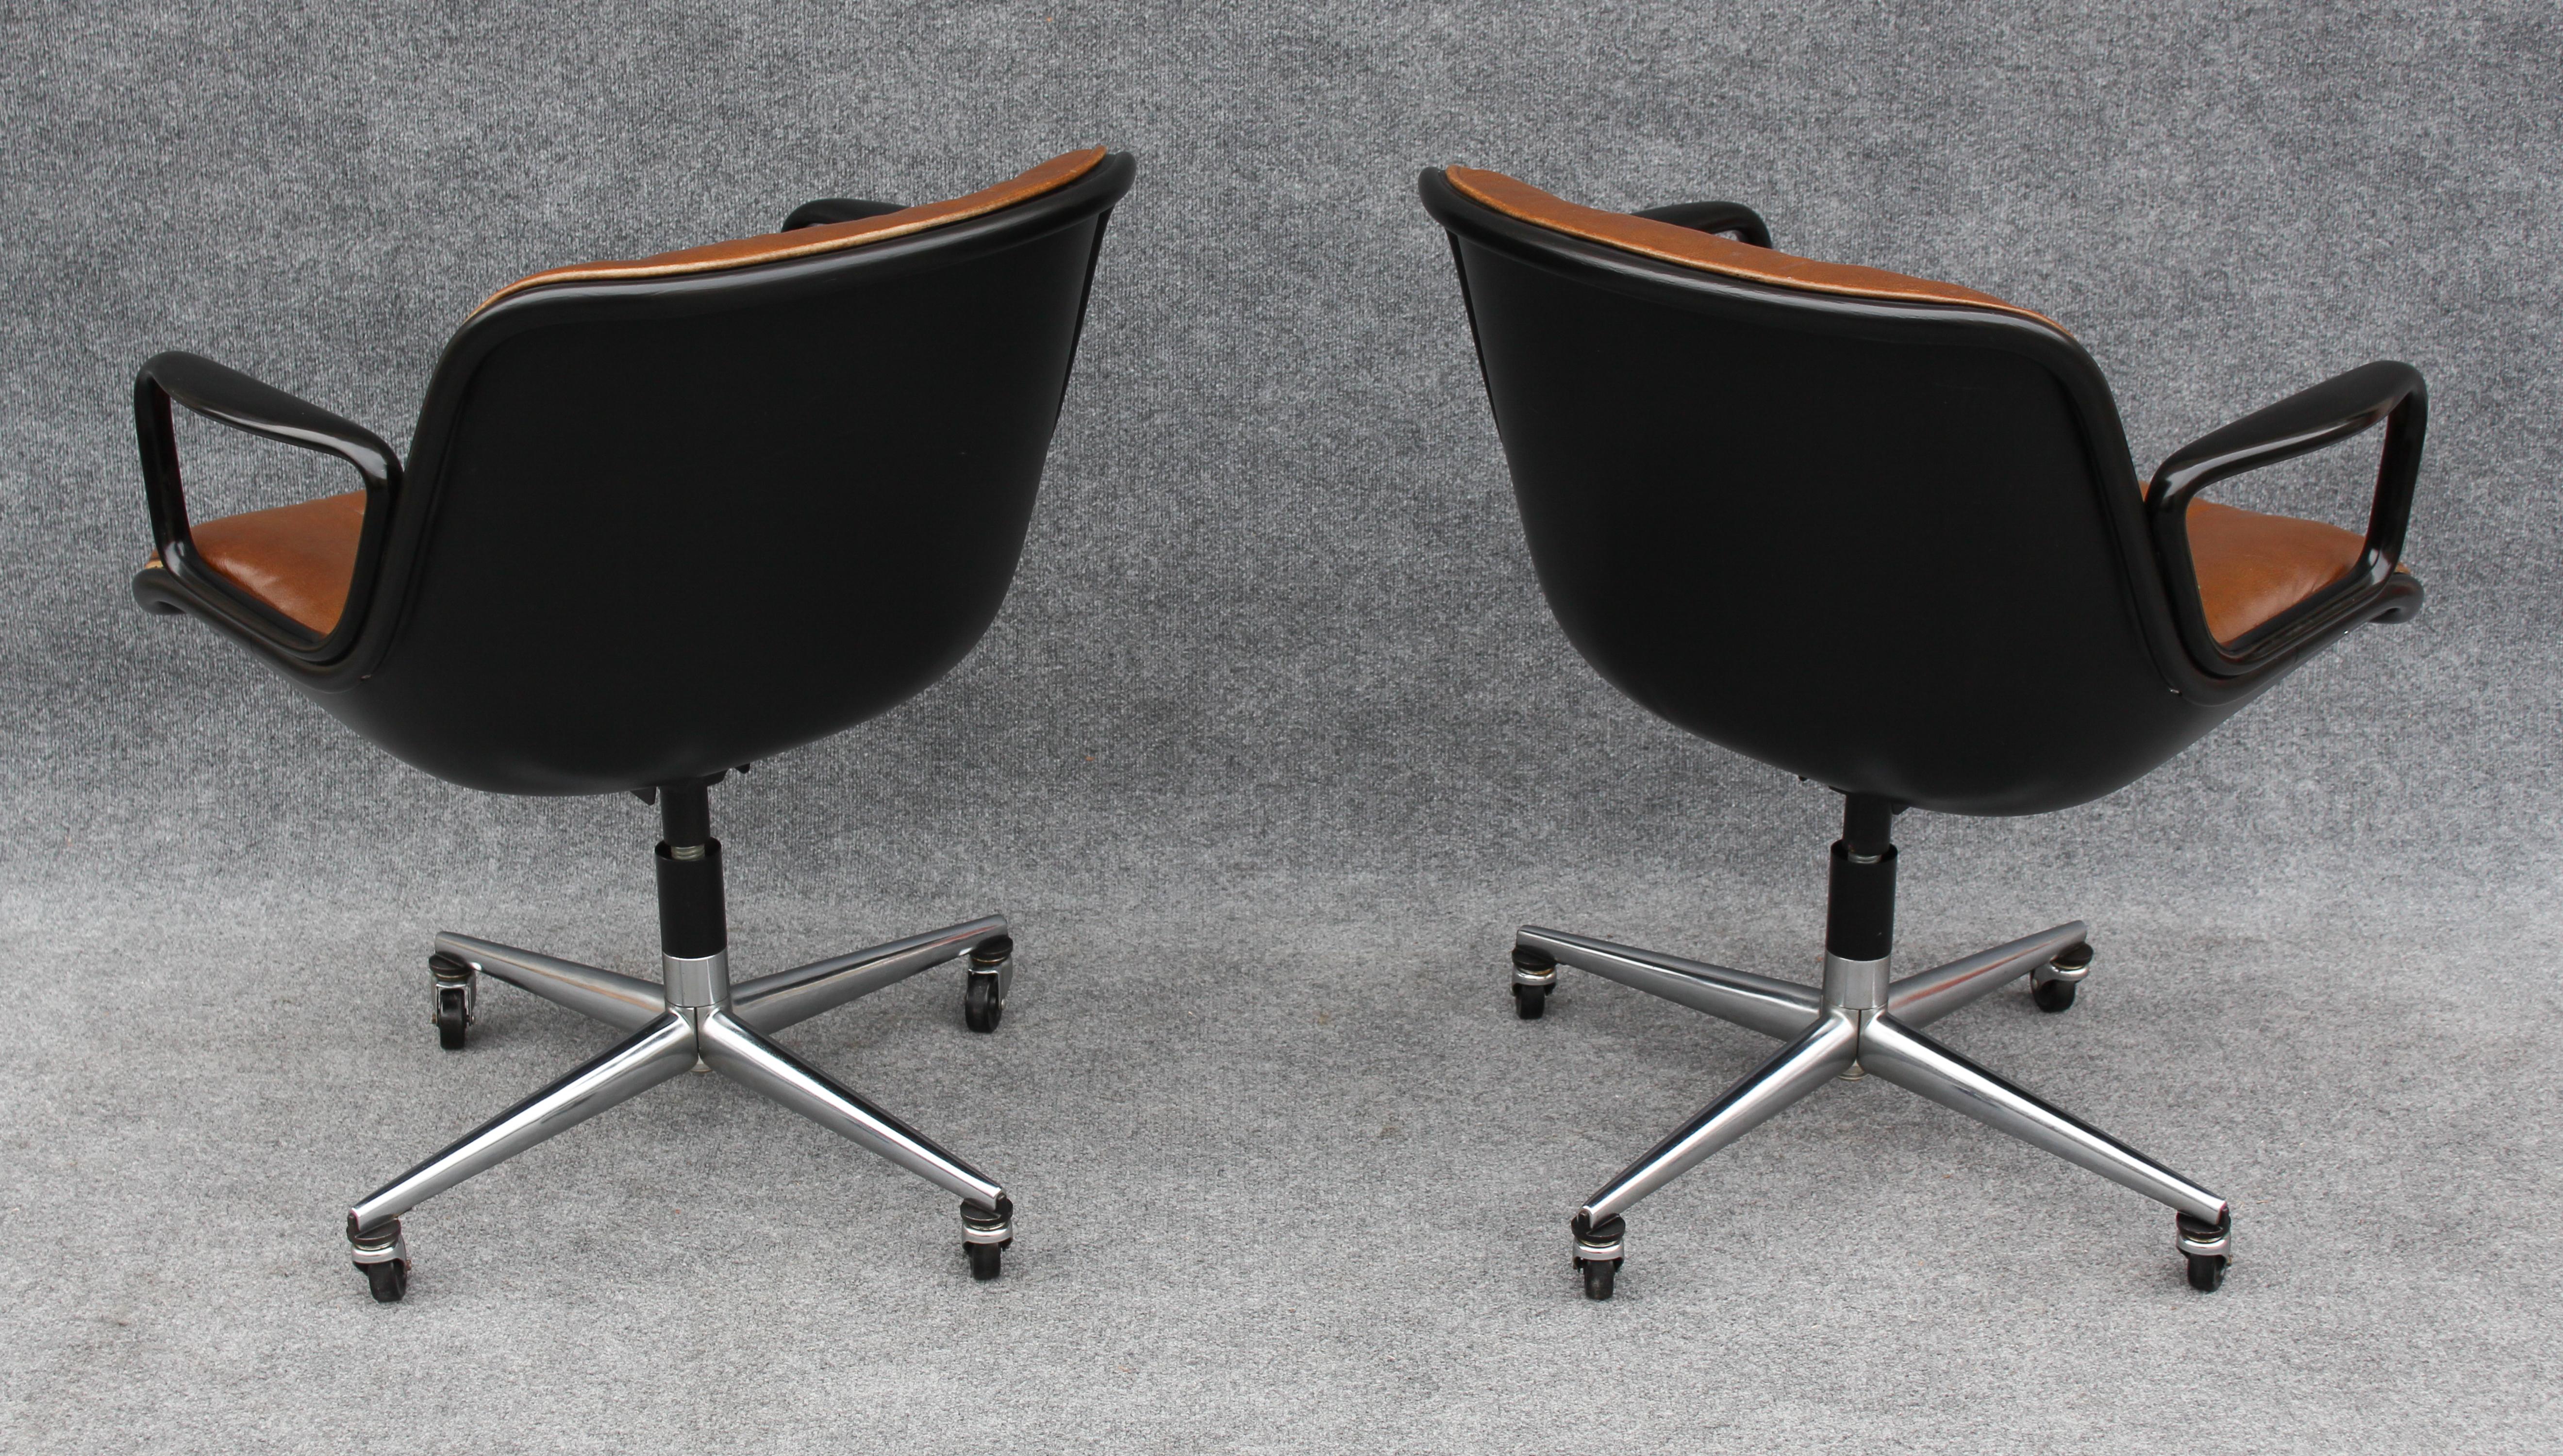 Steel Pair of Charles Pollock for Knoll Arm or Desk Chairs in Brown Leather & Black